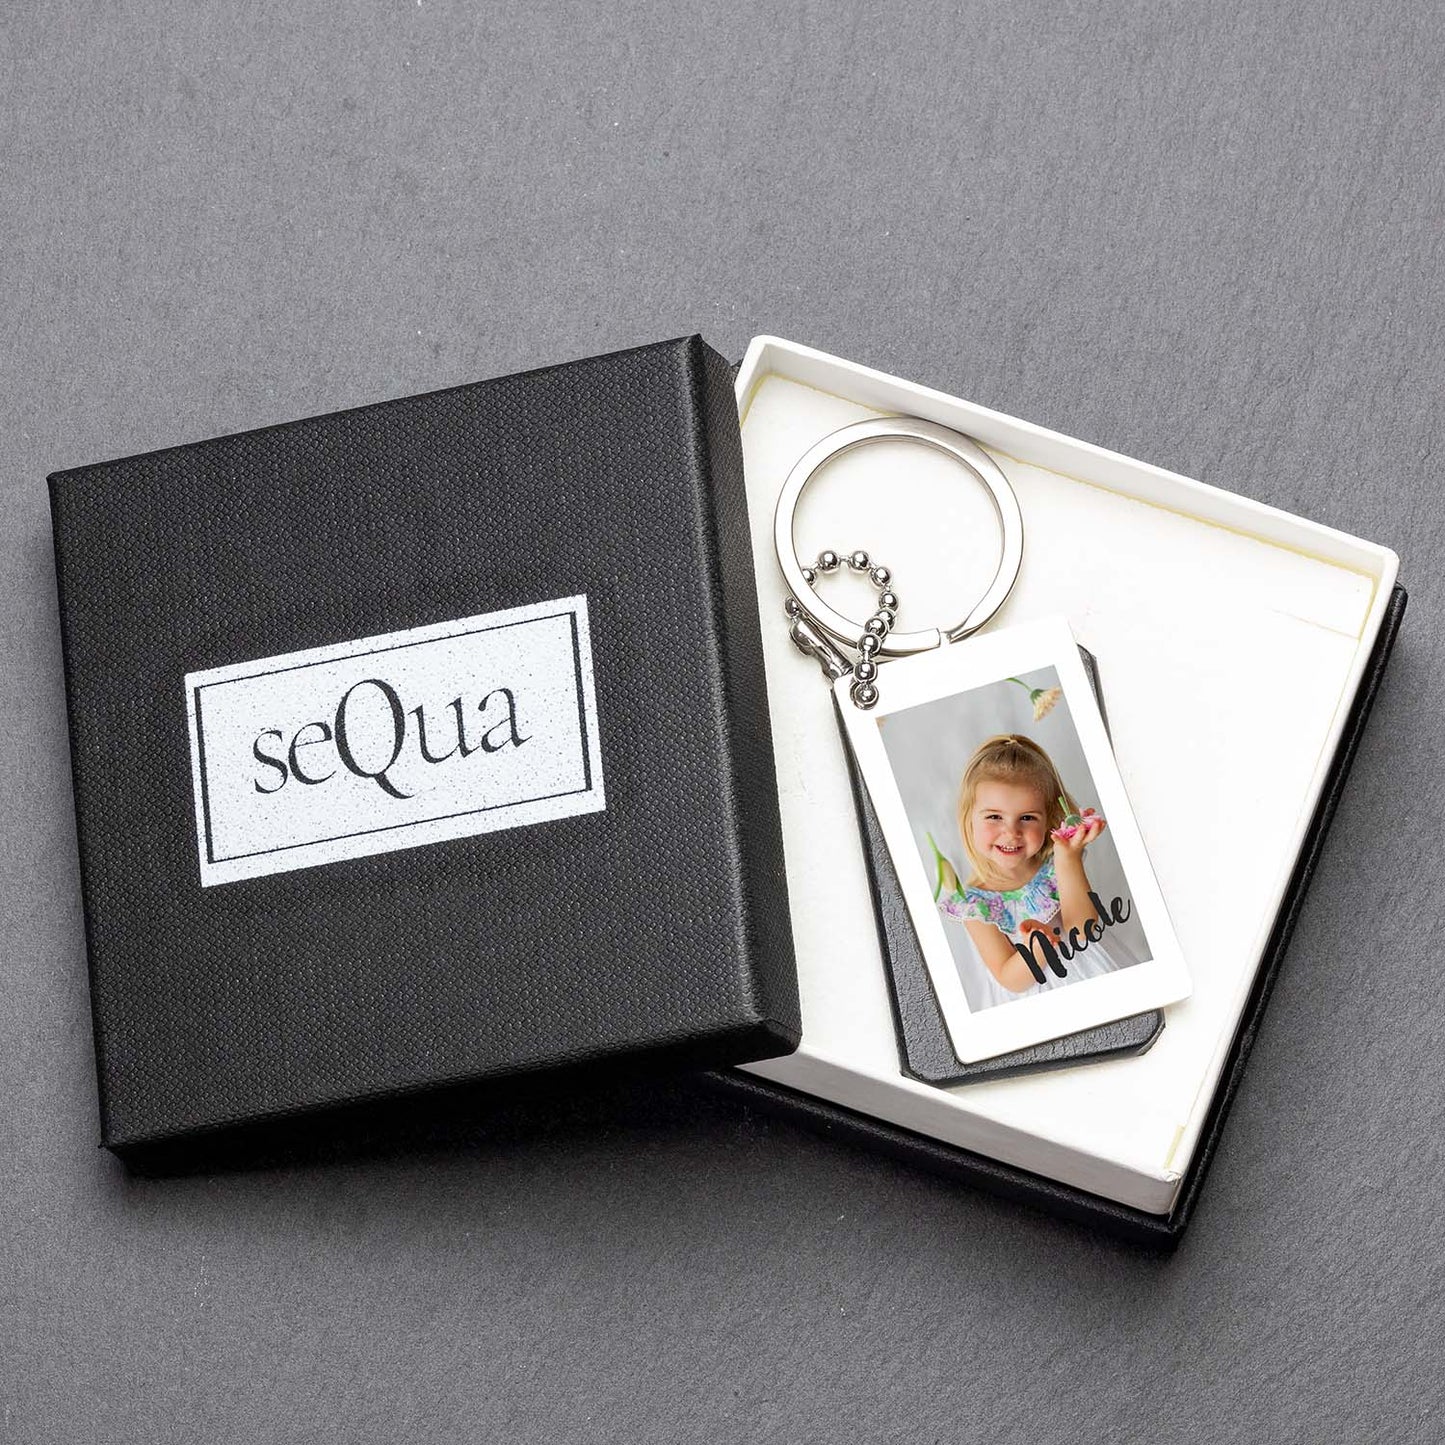 Photo Keychain with Engraving: Your Unique Black Leather Accessory - seQua.Shop